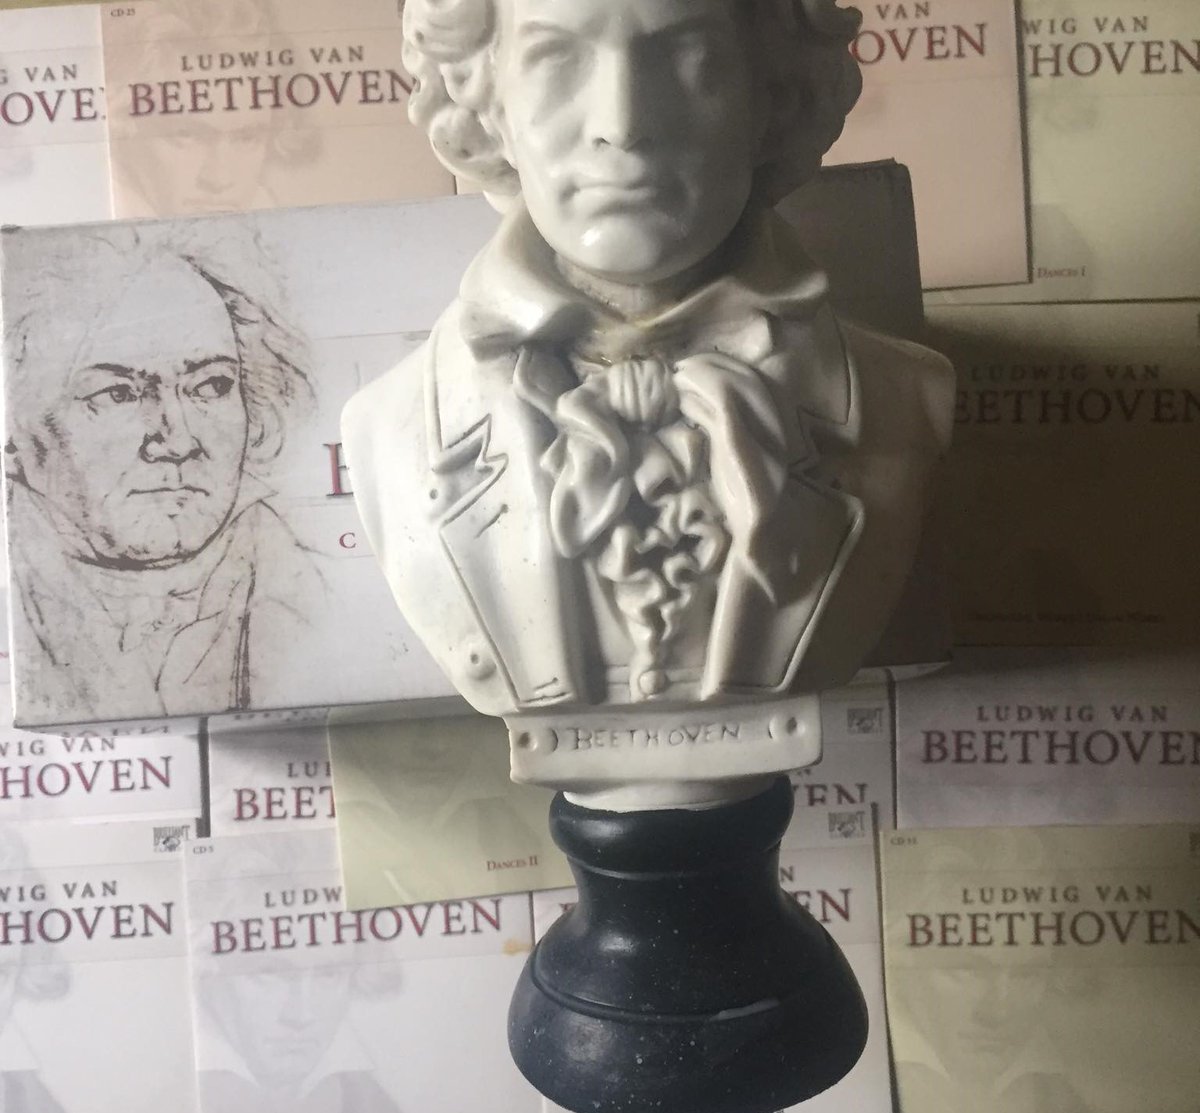 The complete works of the one and only Ludwig Van Beethoven was a wonderful gift to myself one Christmas many years ago. A treasure trove of very beautiful music. The 'Irish' Seventh Symphony a favourite. 
rte irishtimes independentie oldies seniortimes media ?
classicfm  lyricfm